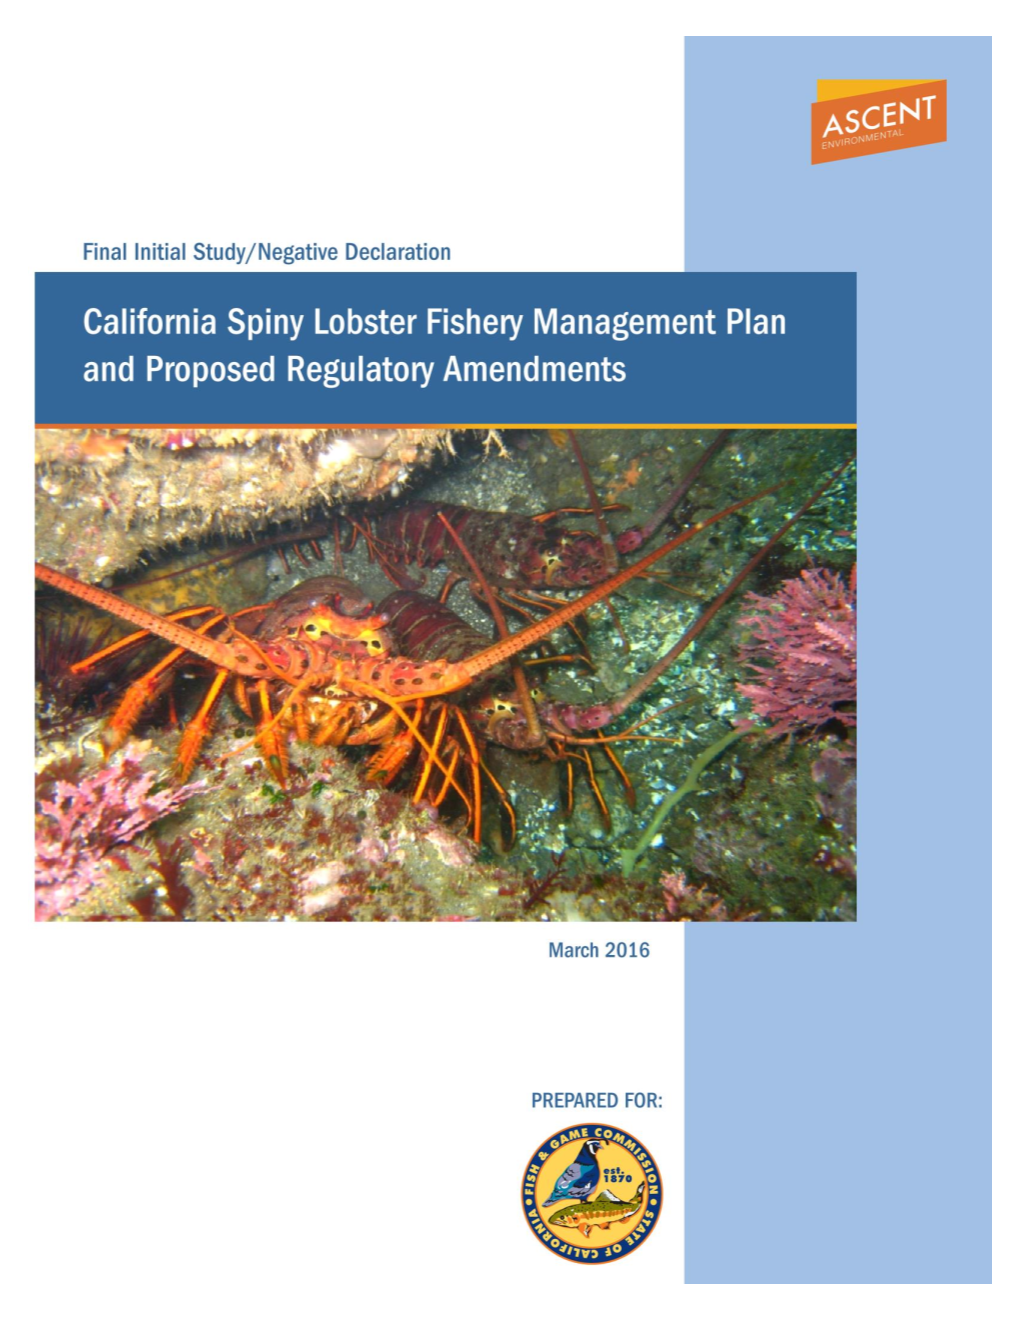 California Spiny Lobster Fishery Management Plan and Proposed Regulatory Amendments